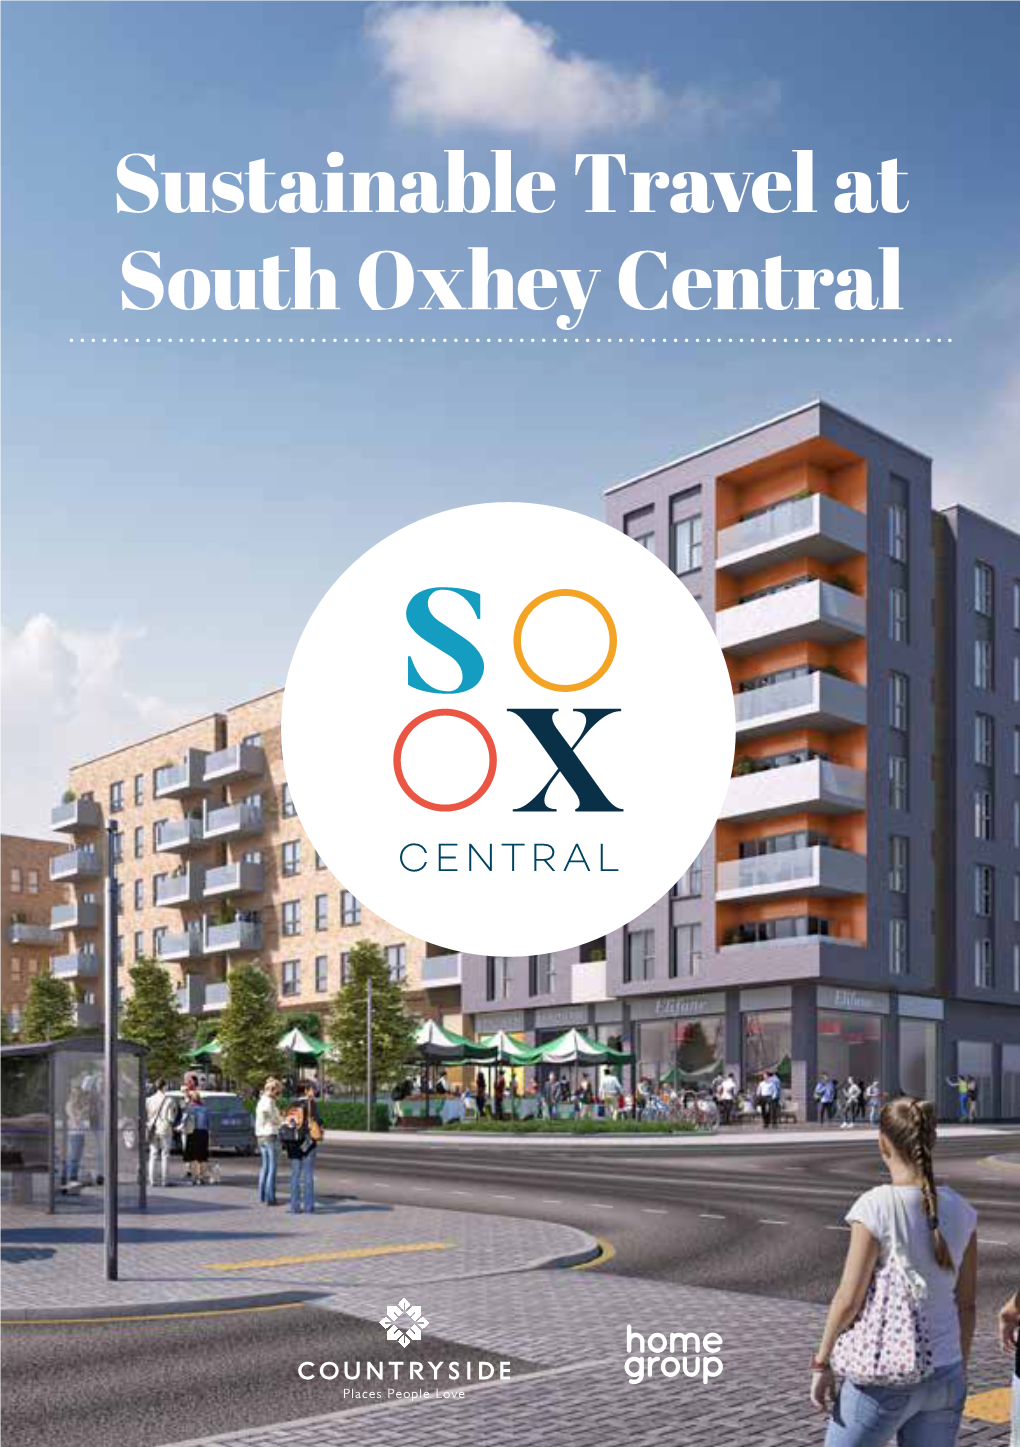 Sustainable Travel at South Oxhey Central Welcome to Your New Home, We Hope You Will Be Very Happy Here!